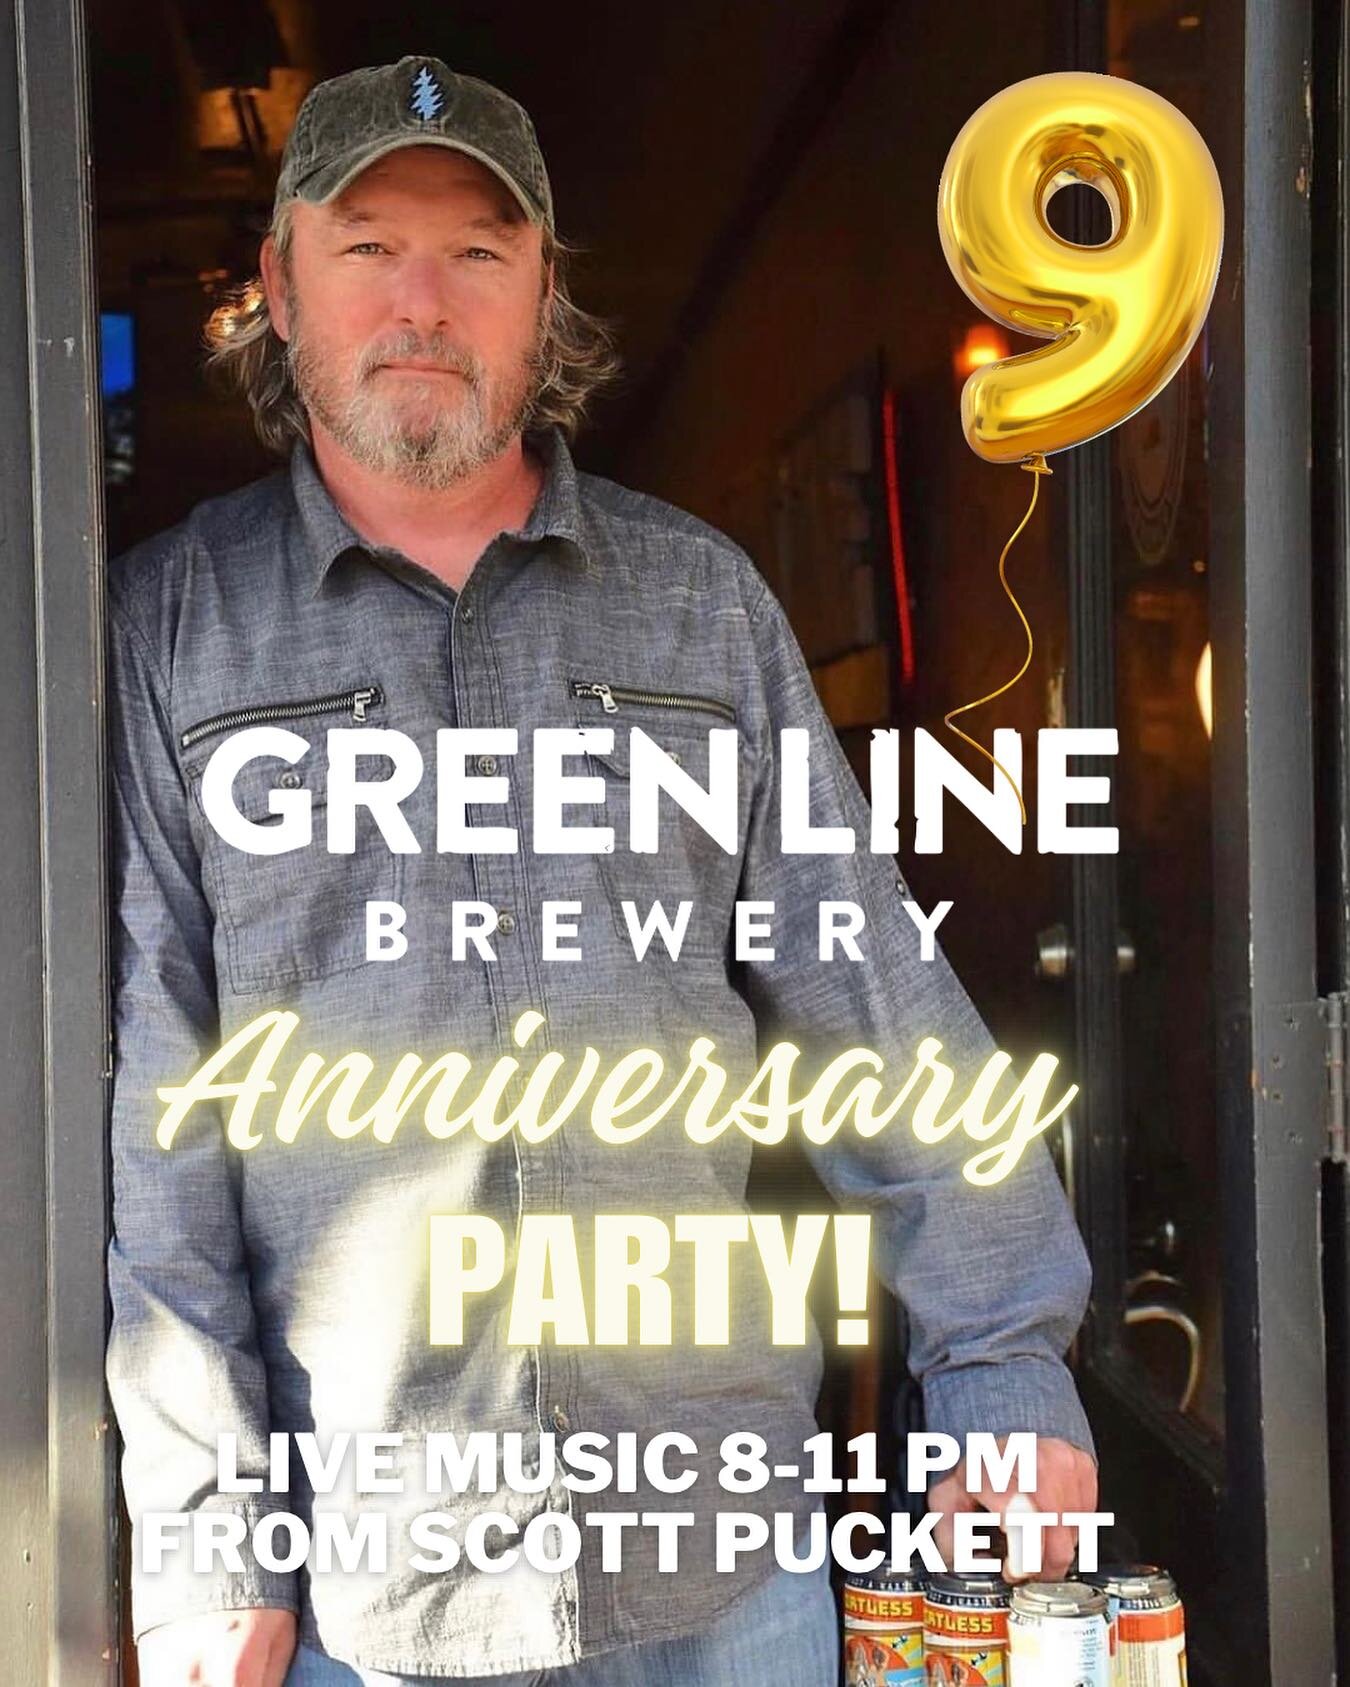 Celebrate our 9 year Anniversary with us TONIGHT at Green Line Brewery!🍺✨ What better way to celebrate our brewpub than with an original like Scott Puckett (8-11 PM)! Green beer will still be flowing all night🍀🇮🇪🍺✨ #GREENLINEBREWERY